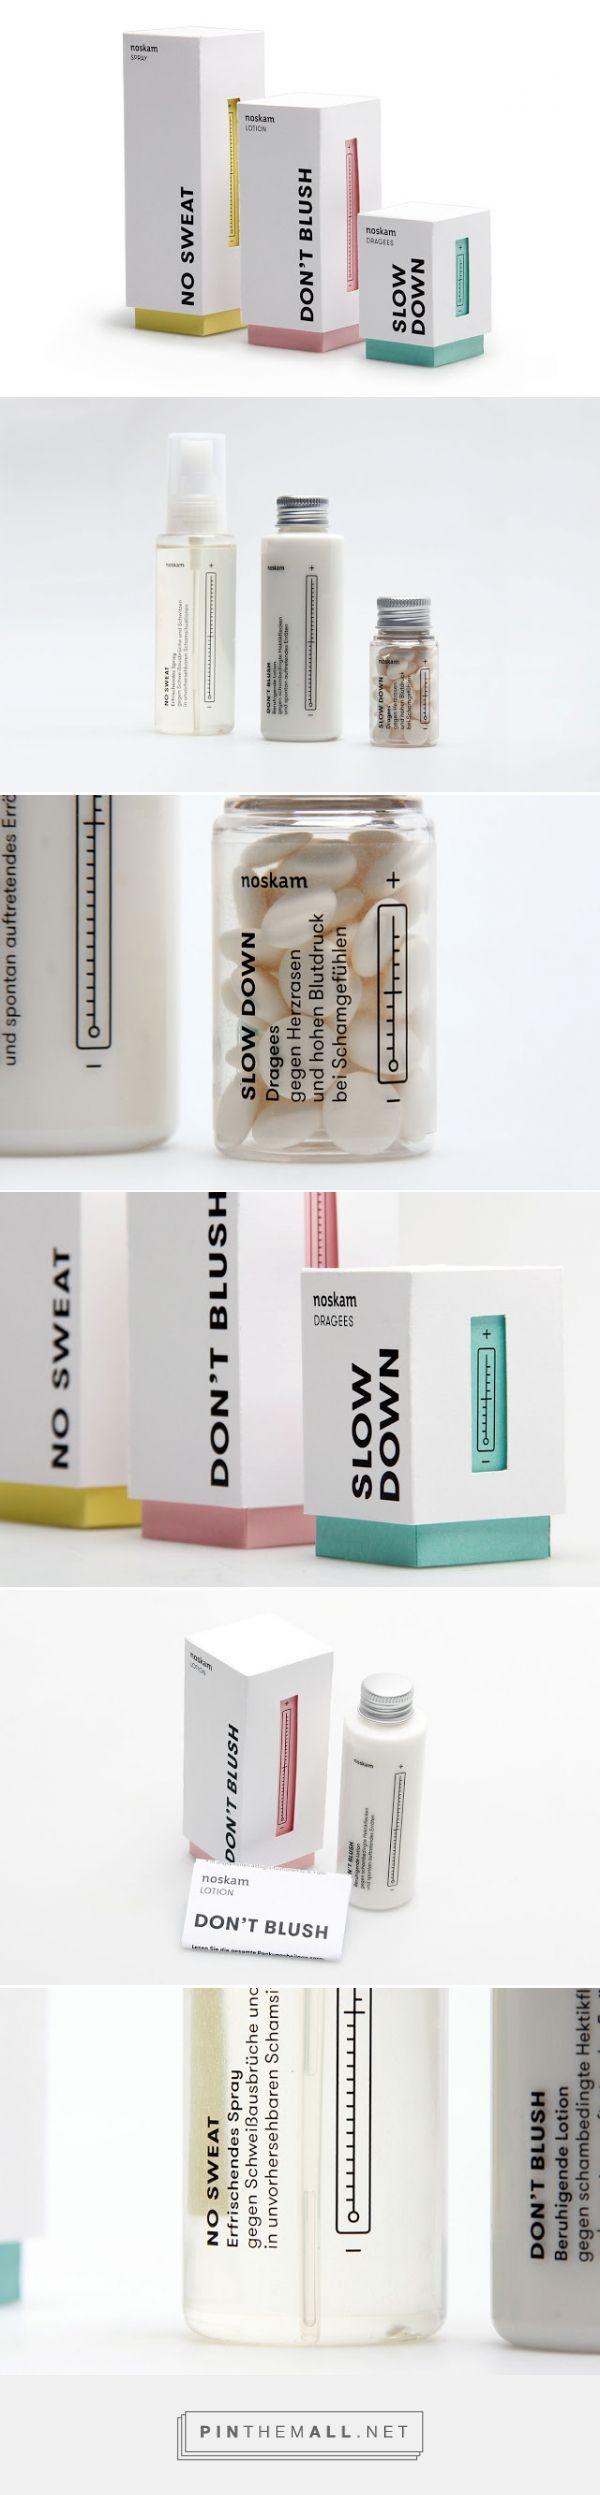 Mariage - Noskam Student Packaging Concept Designed By Muskat (Germany) - Http://www.packagingoftheworld.com/2016/01/noskam-student-project.html... - A Grouped Images Picture